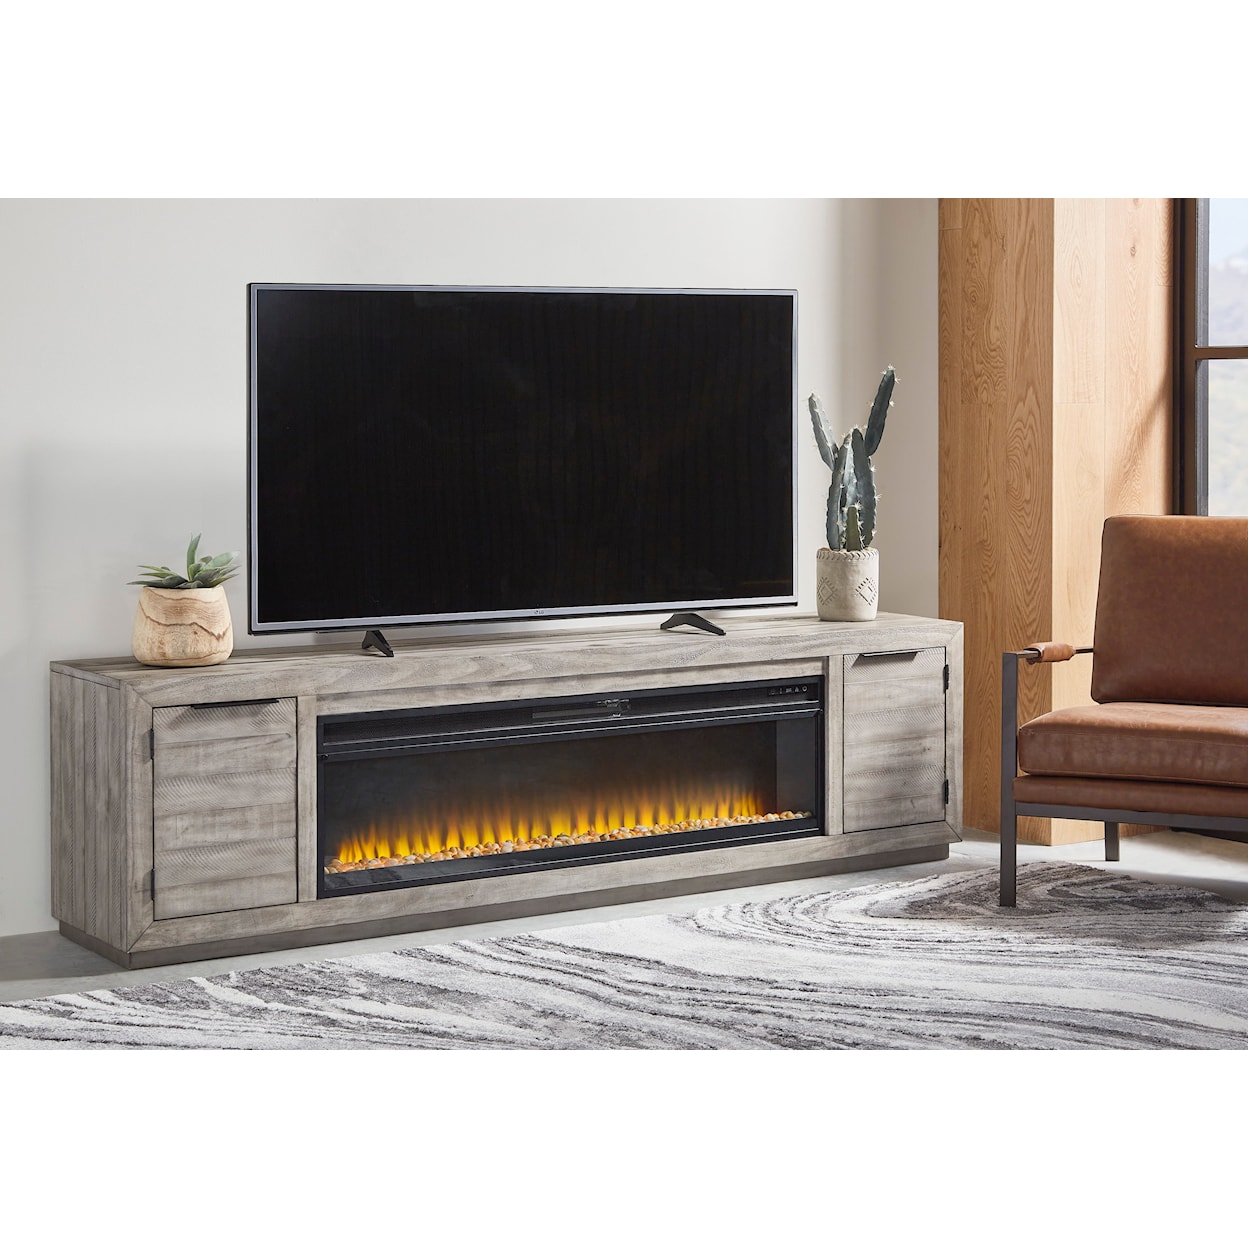 Benchcraft Naydell 92" TV Stand with Electric Fireplace